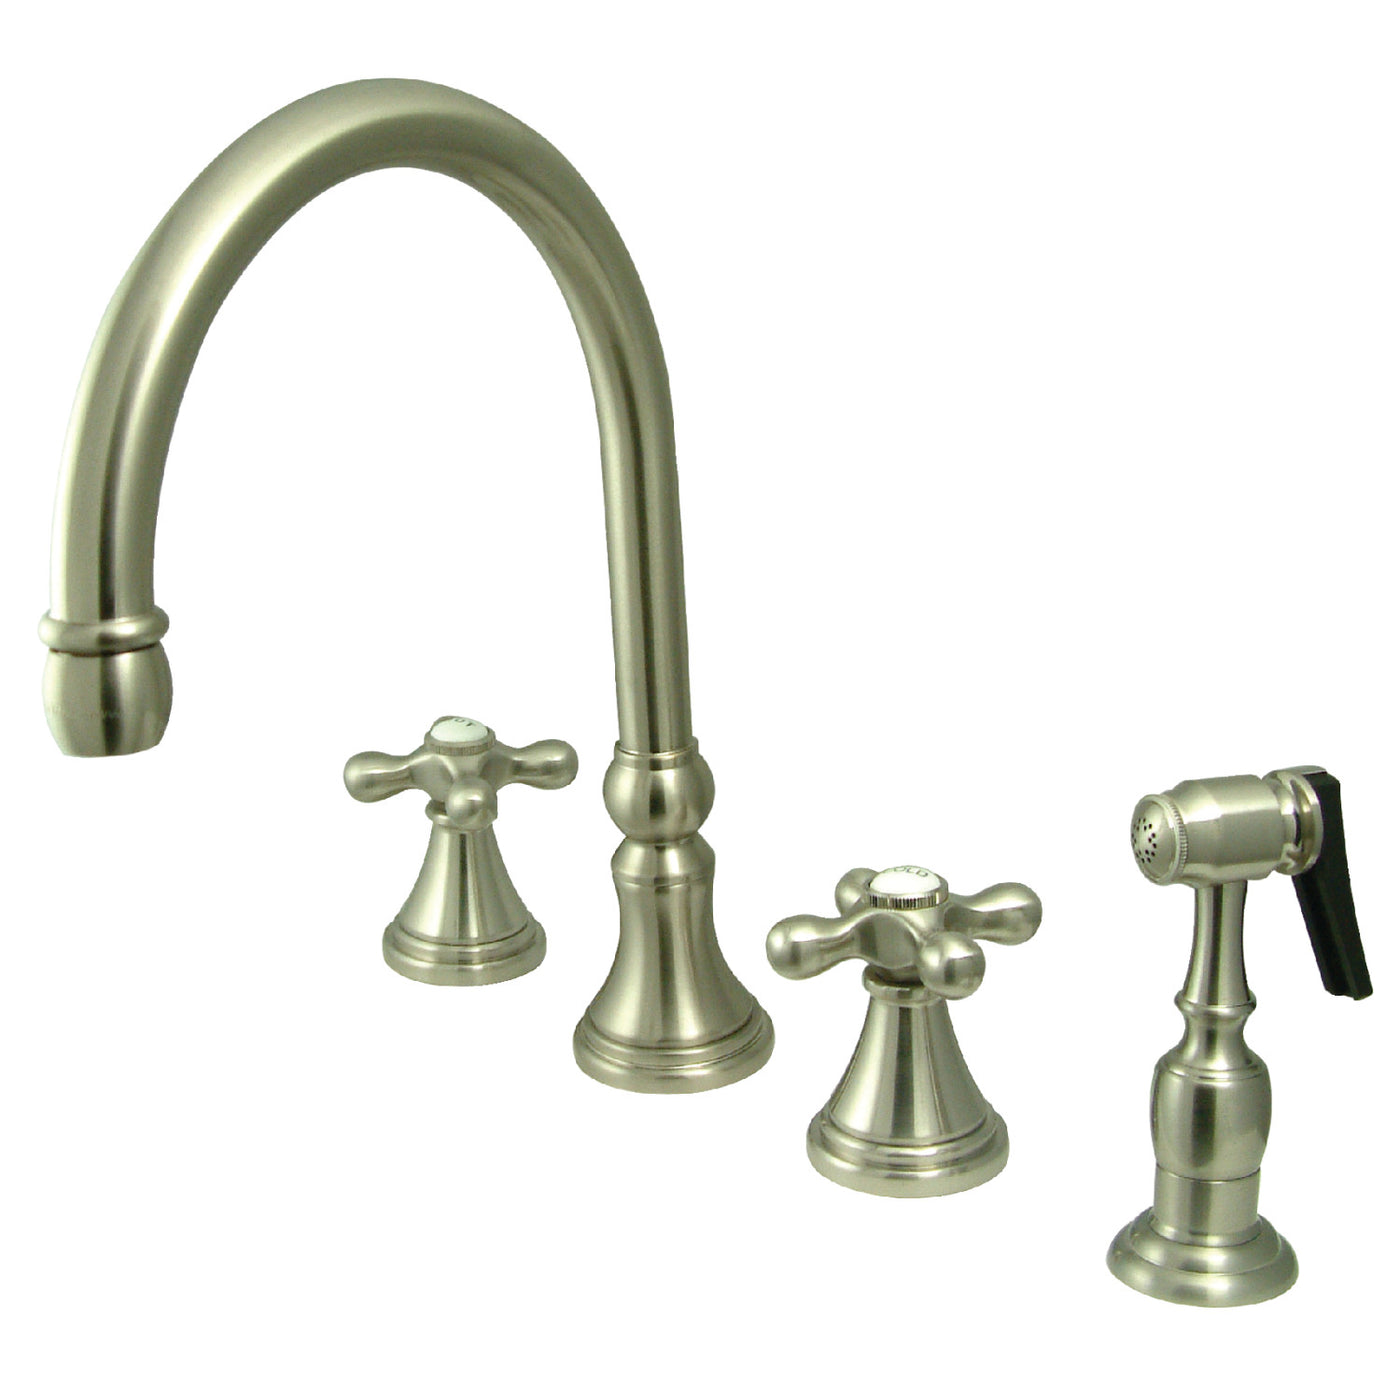 Elements of Design ES2798AXBS Widespread Kitchen Faucet with Brass Sprayer, Brushed Nickel